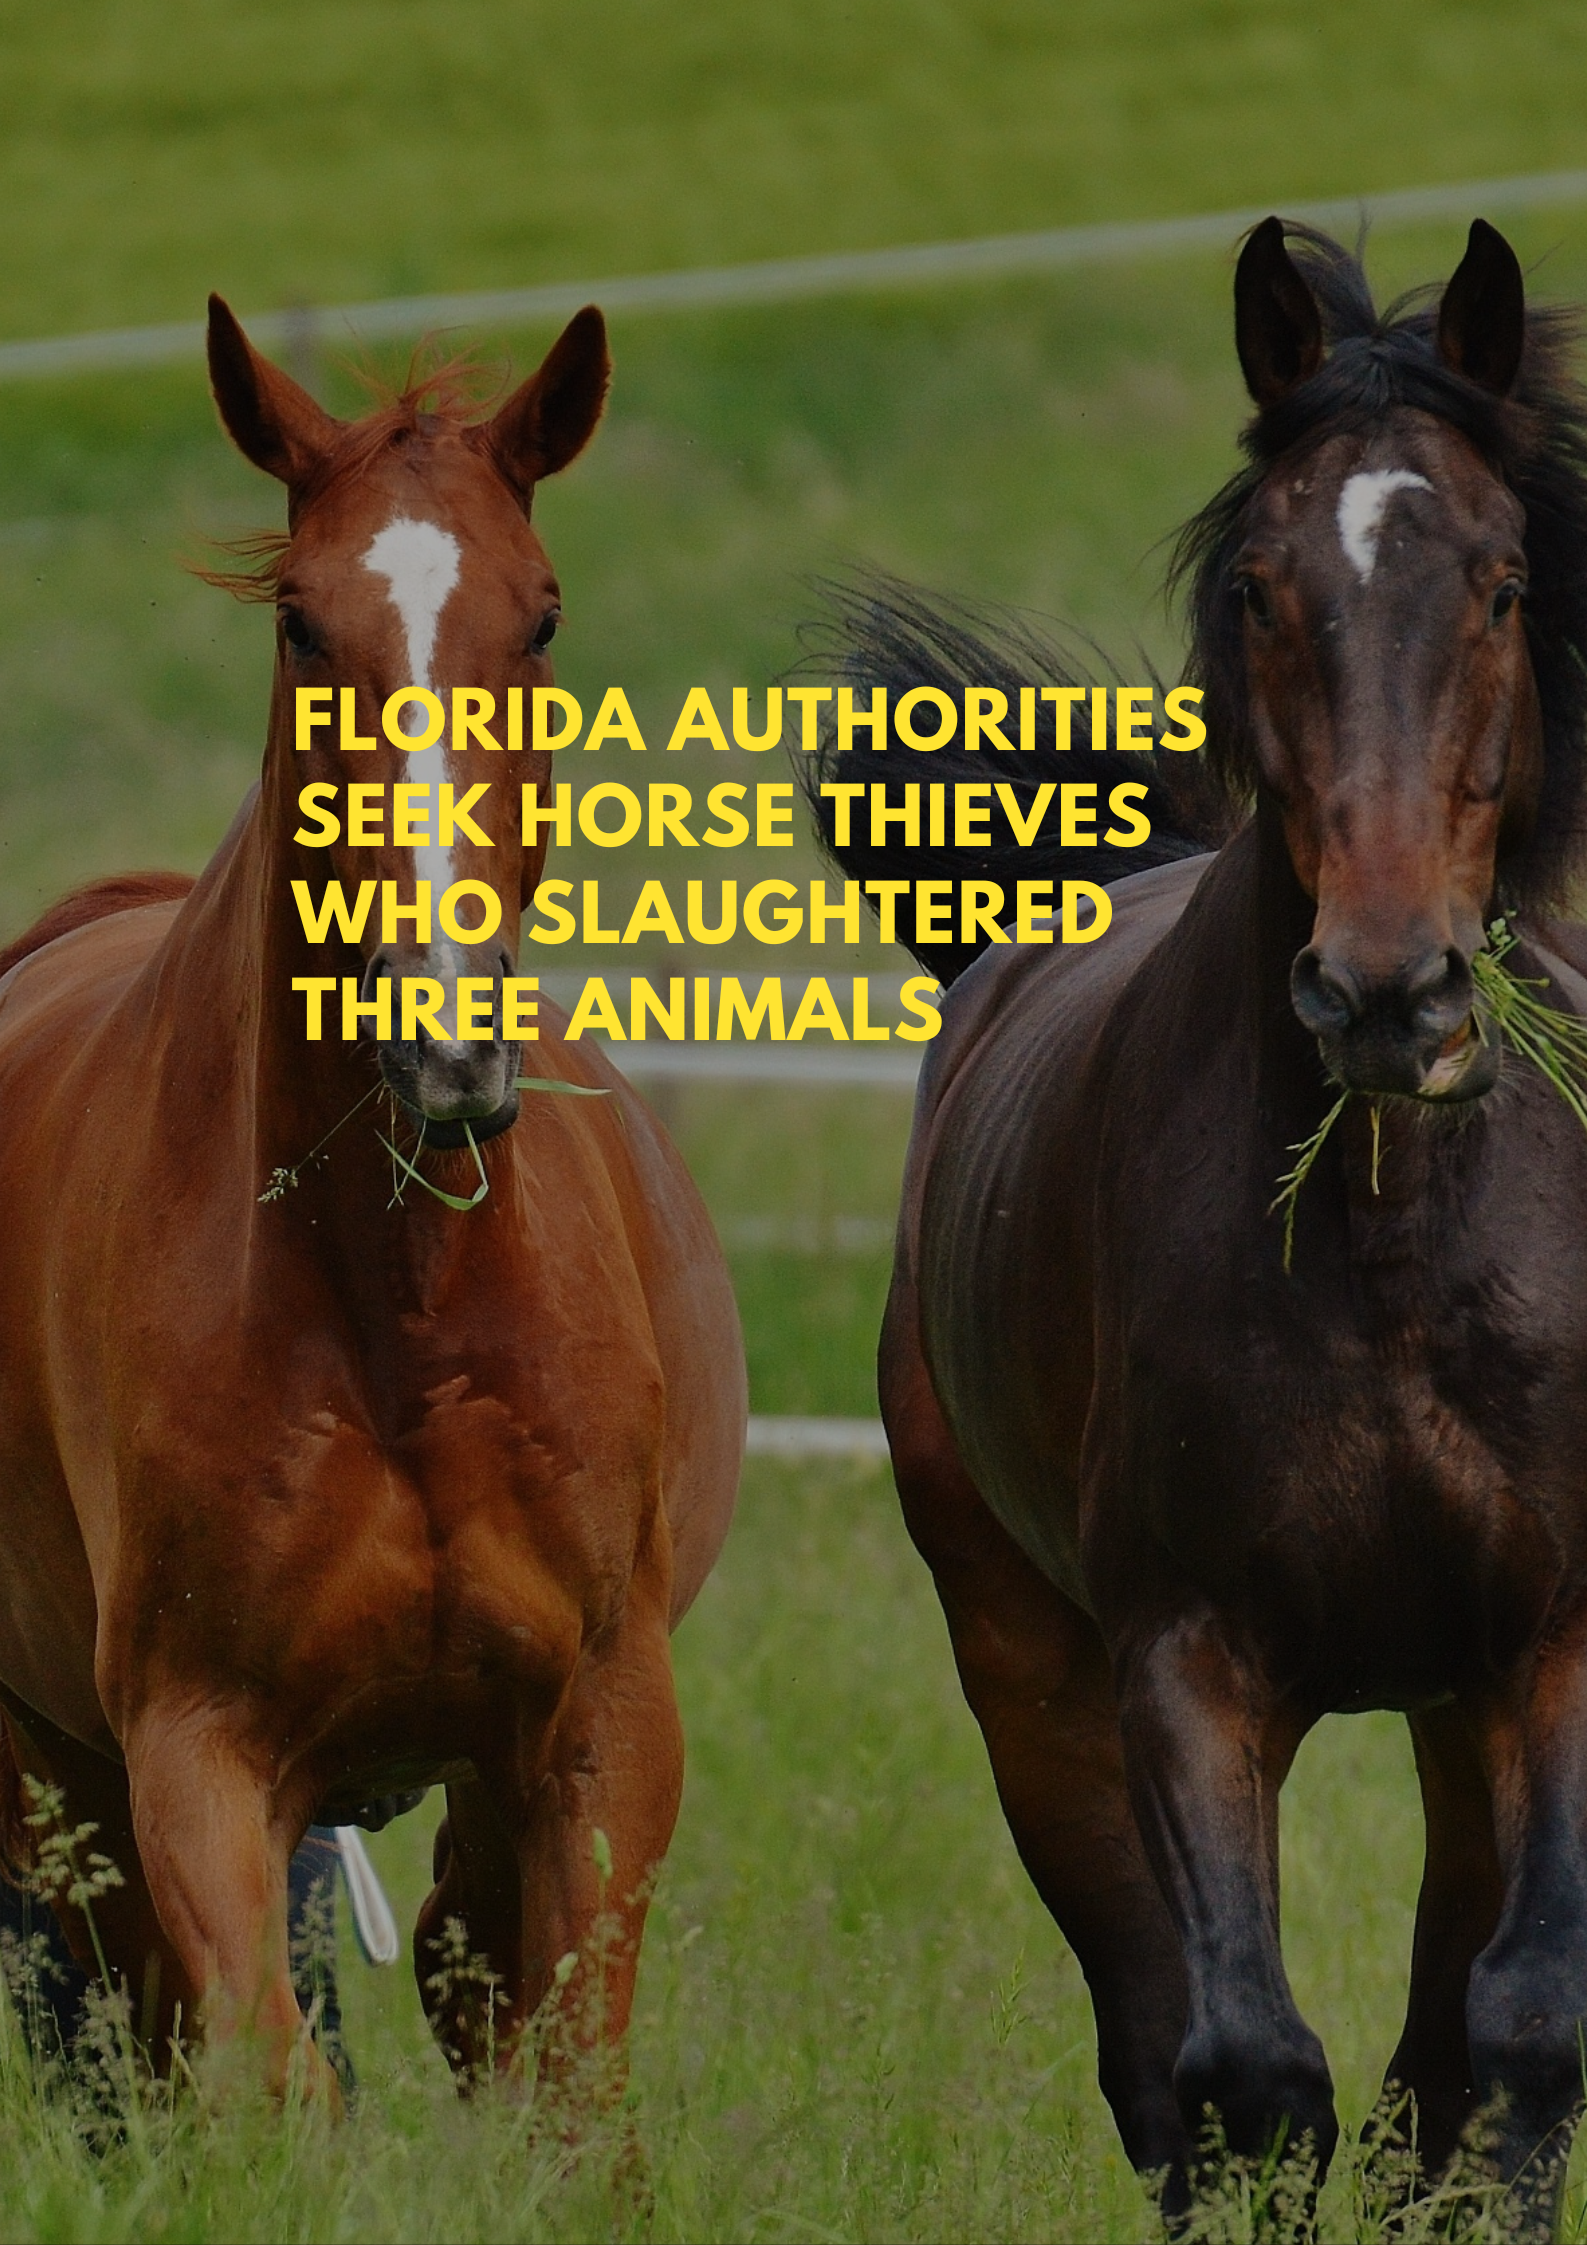 Florida Authorities Hunt for Horse Thieves Responsible for Killing Three Animals